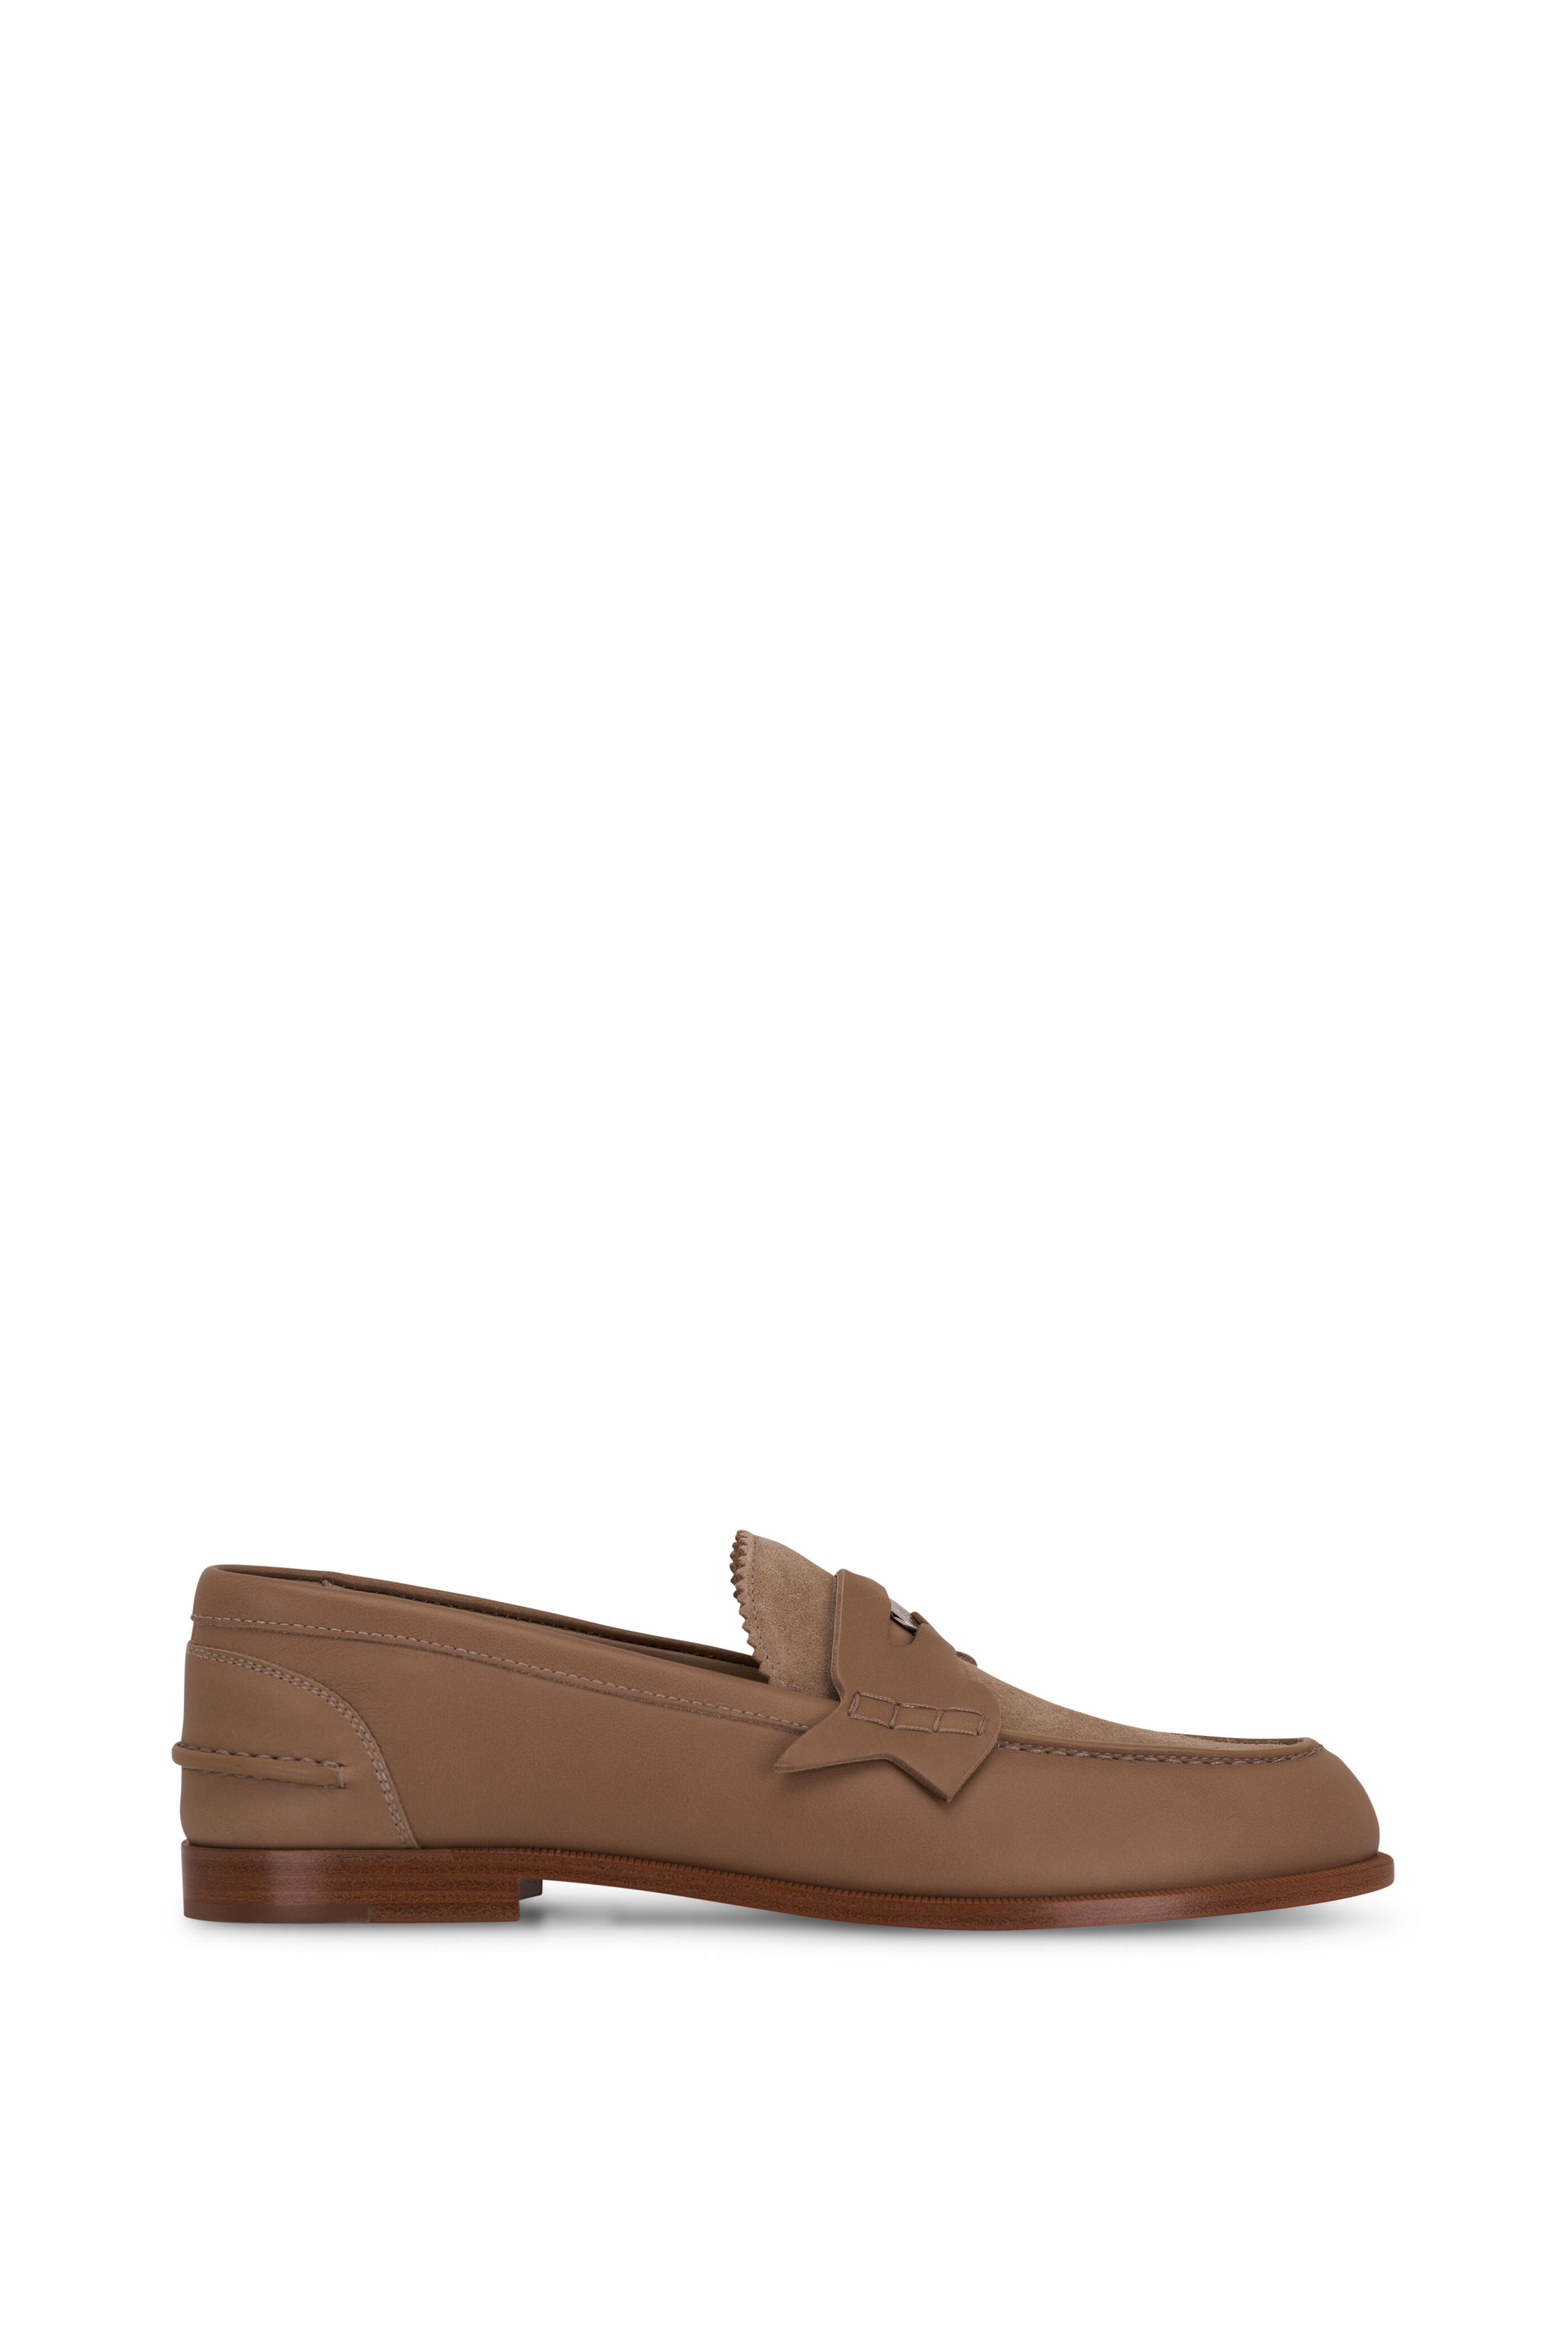 Christian Louboutin - Penny Donna Flat Sahara Leather & Suede Loafer